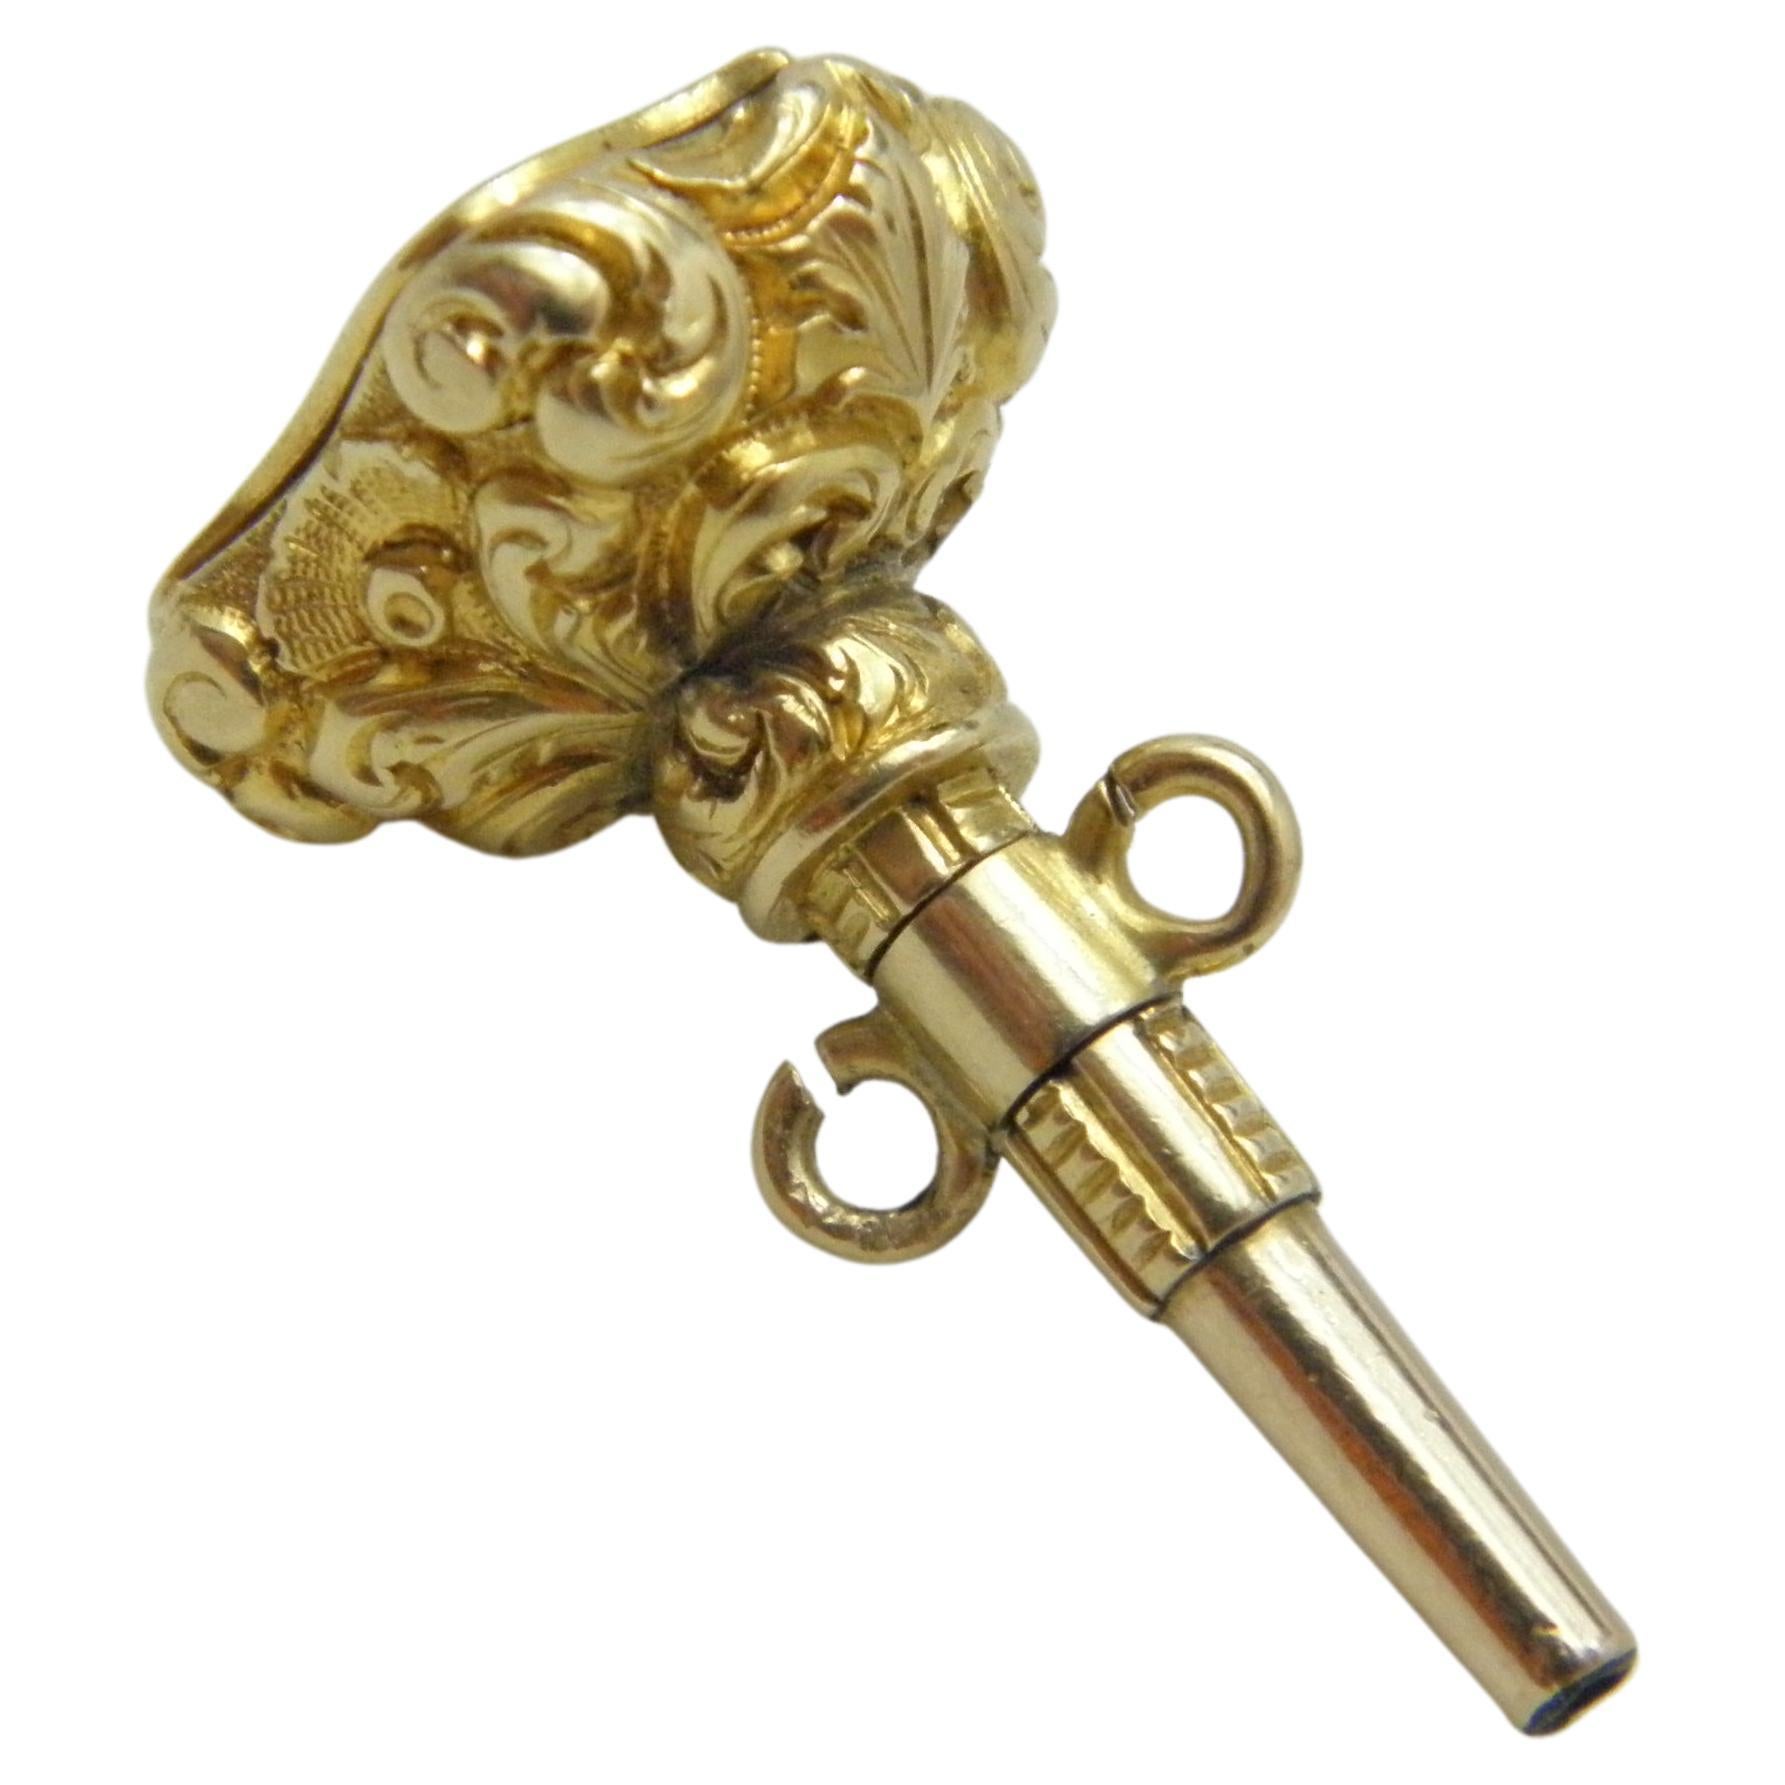 Bargain Antique 15ct Gold Large Pocket Watch Key Fob c1870 625 Purity Heavy 4.6g For Sale